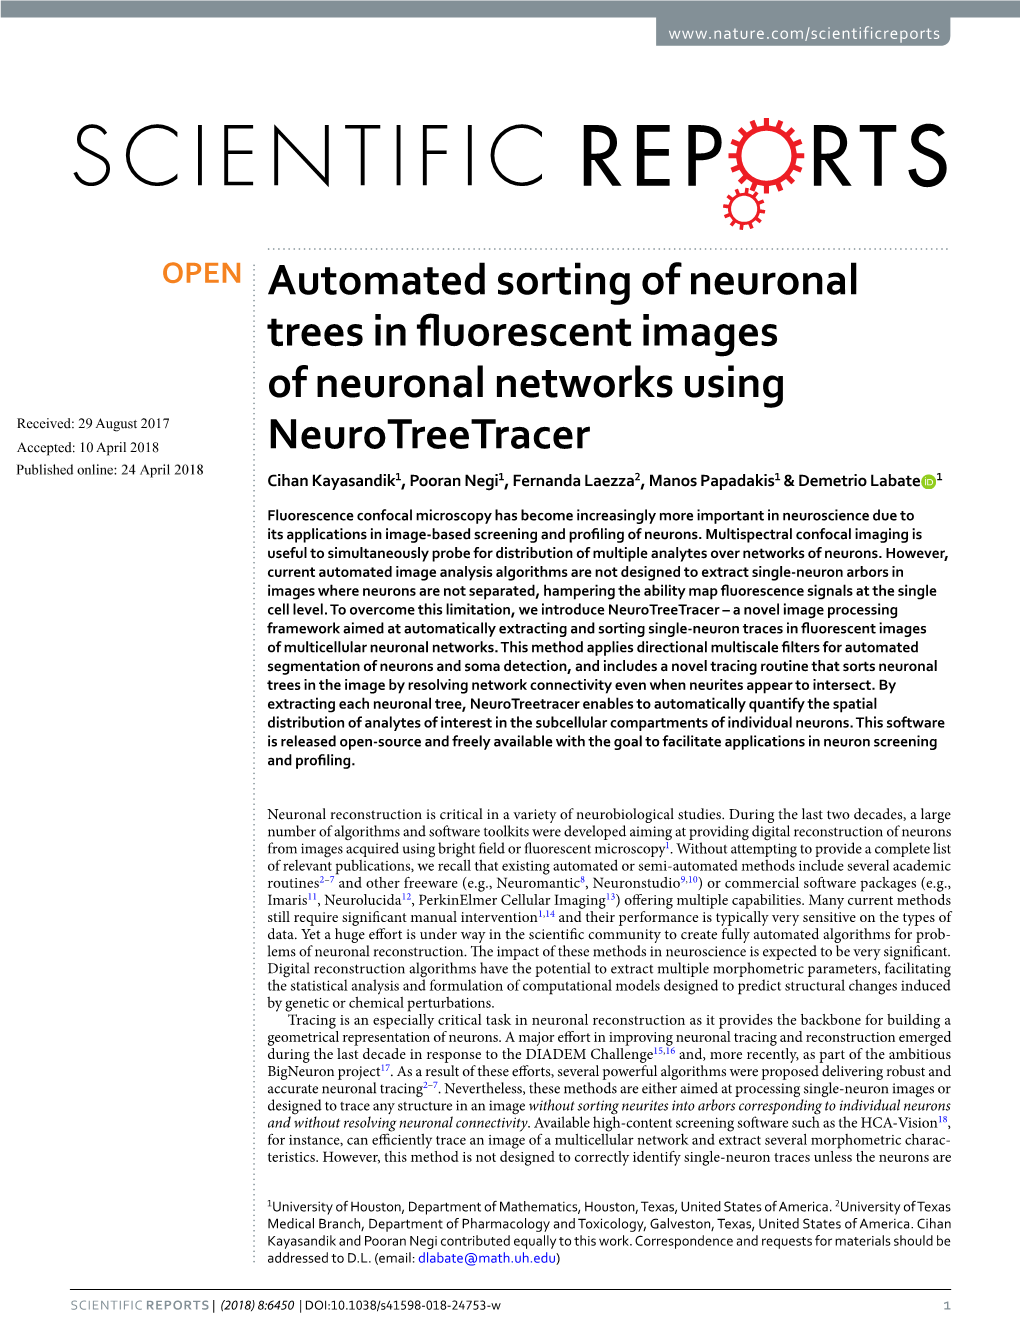 Automated Sorting of Neuronal Trees in Fluorescent Images of Neuronal